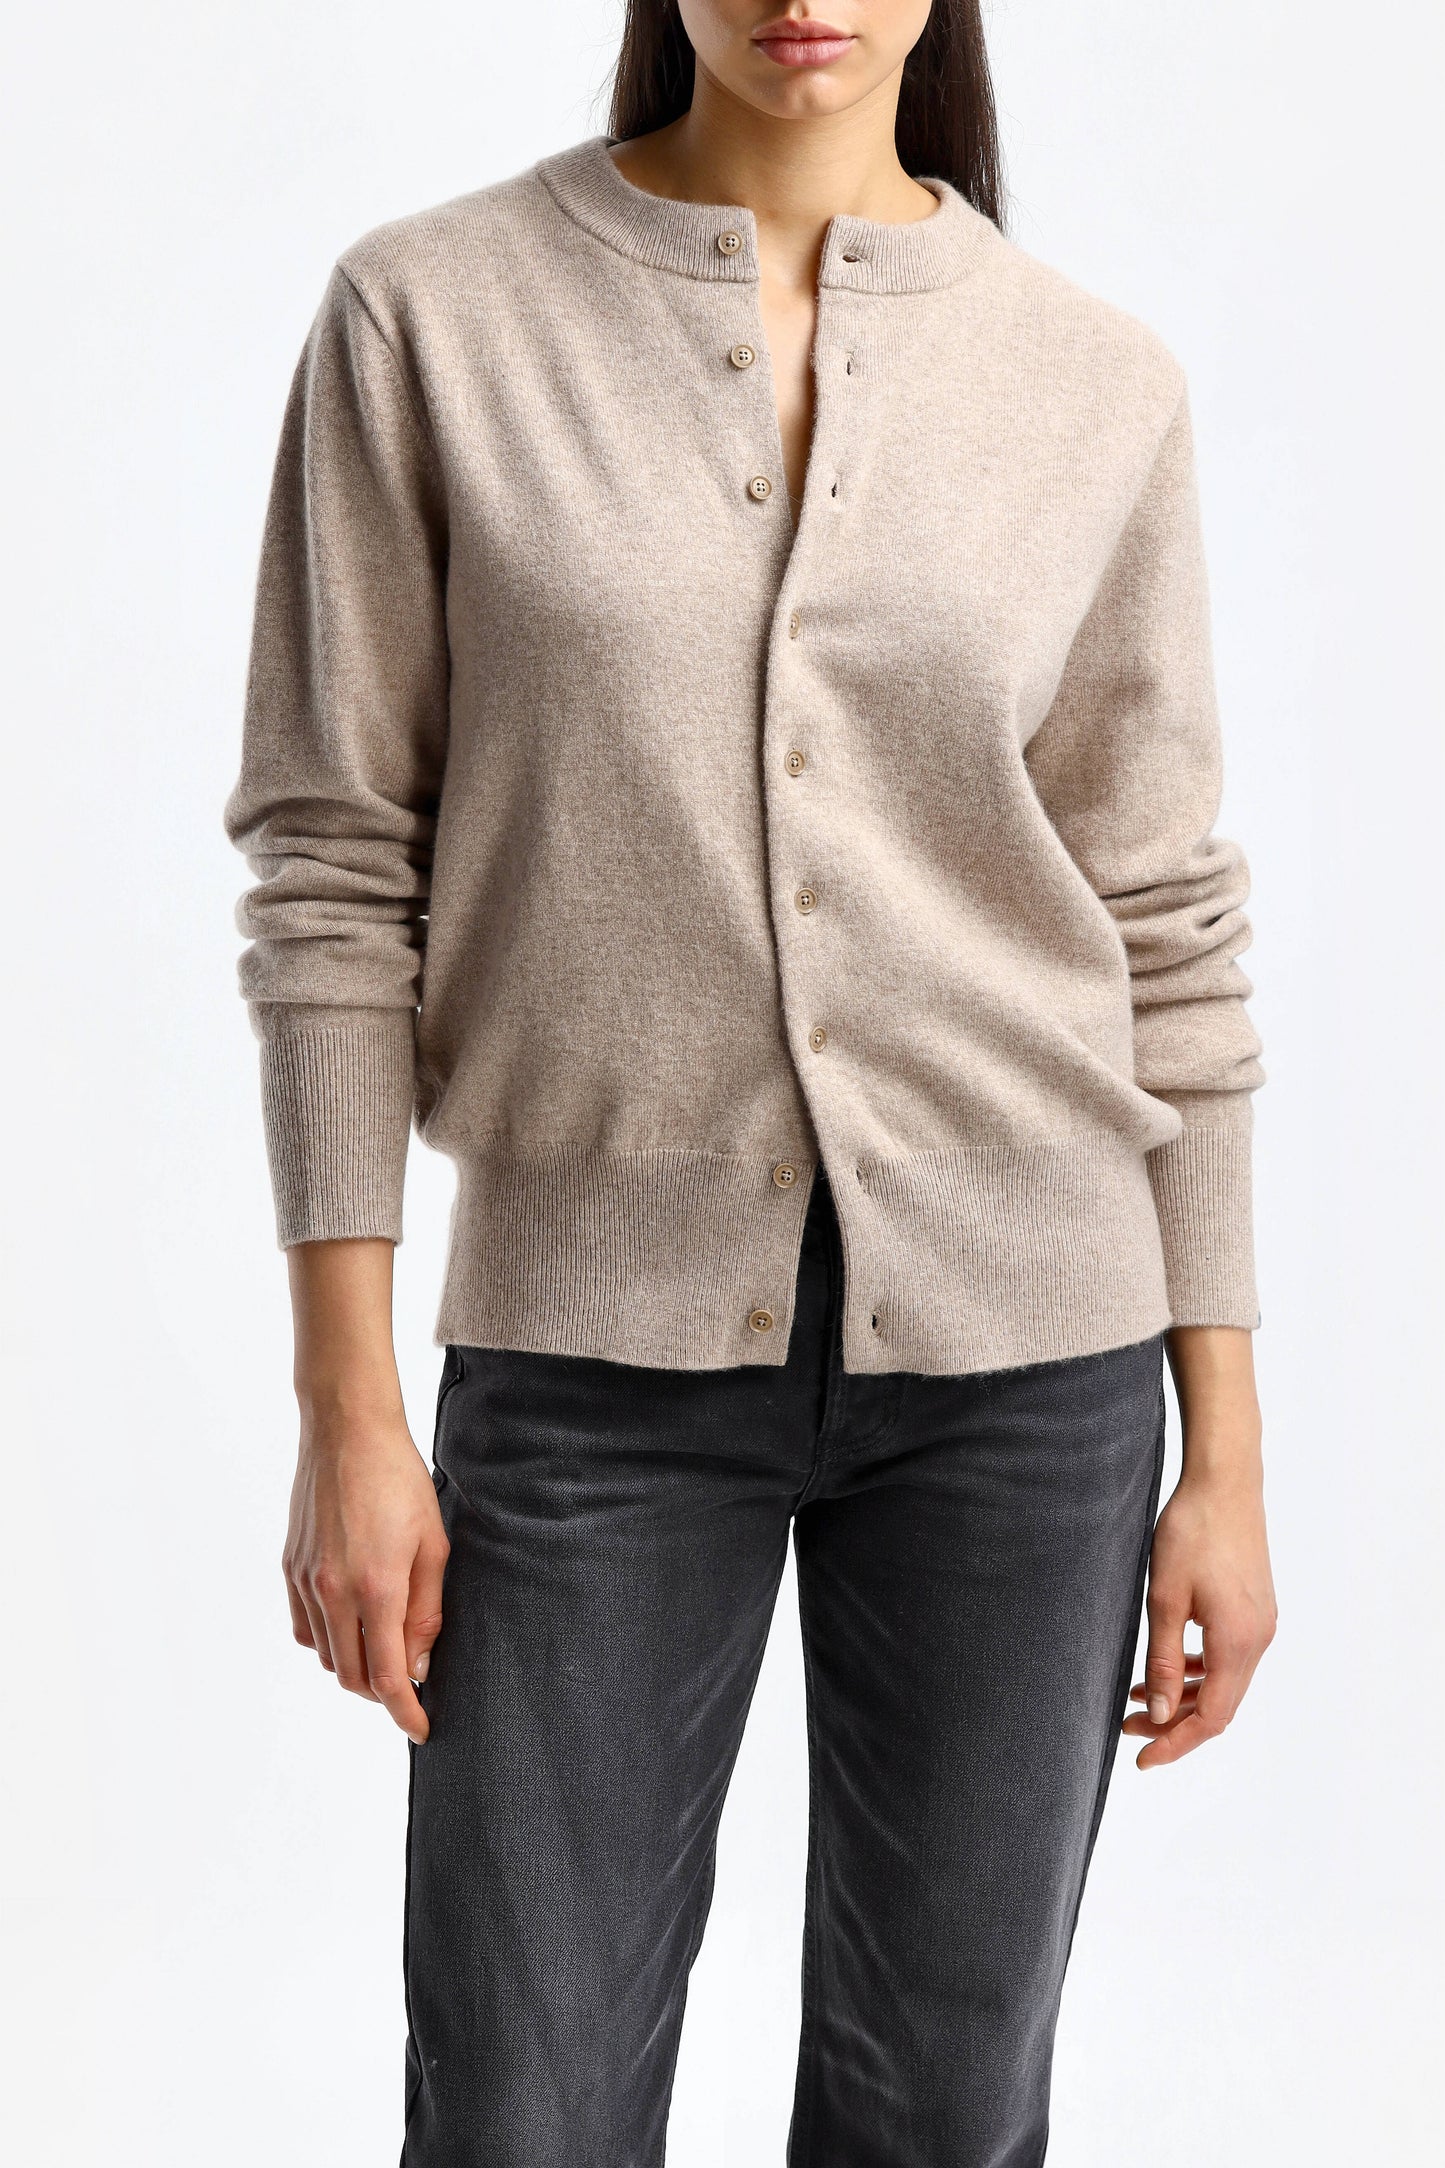 Cardigan Be Game N°283 in SandExtreme Cashmere - Anita Hass